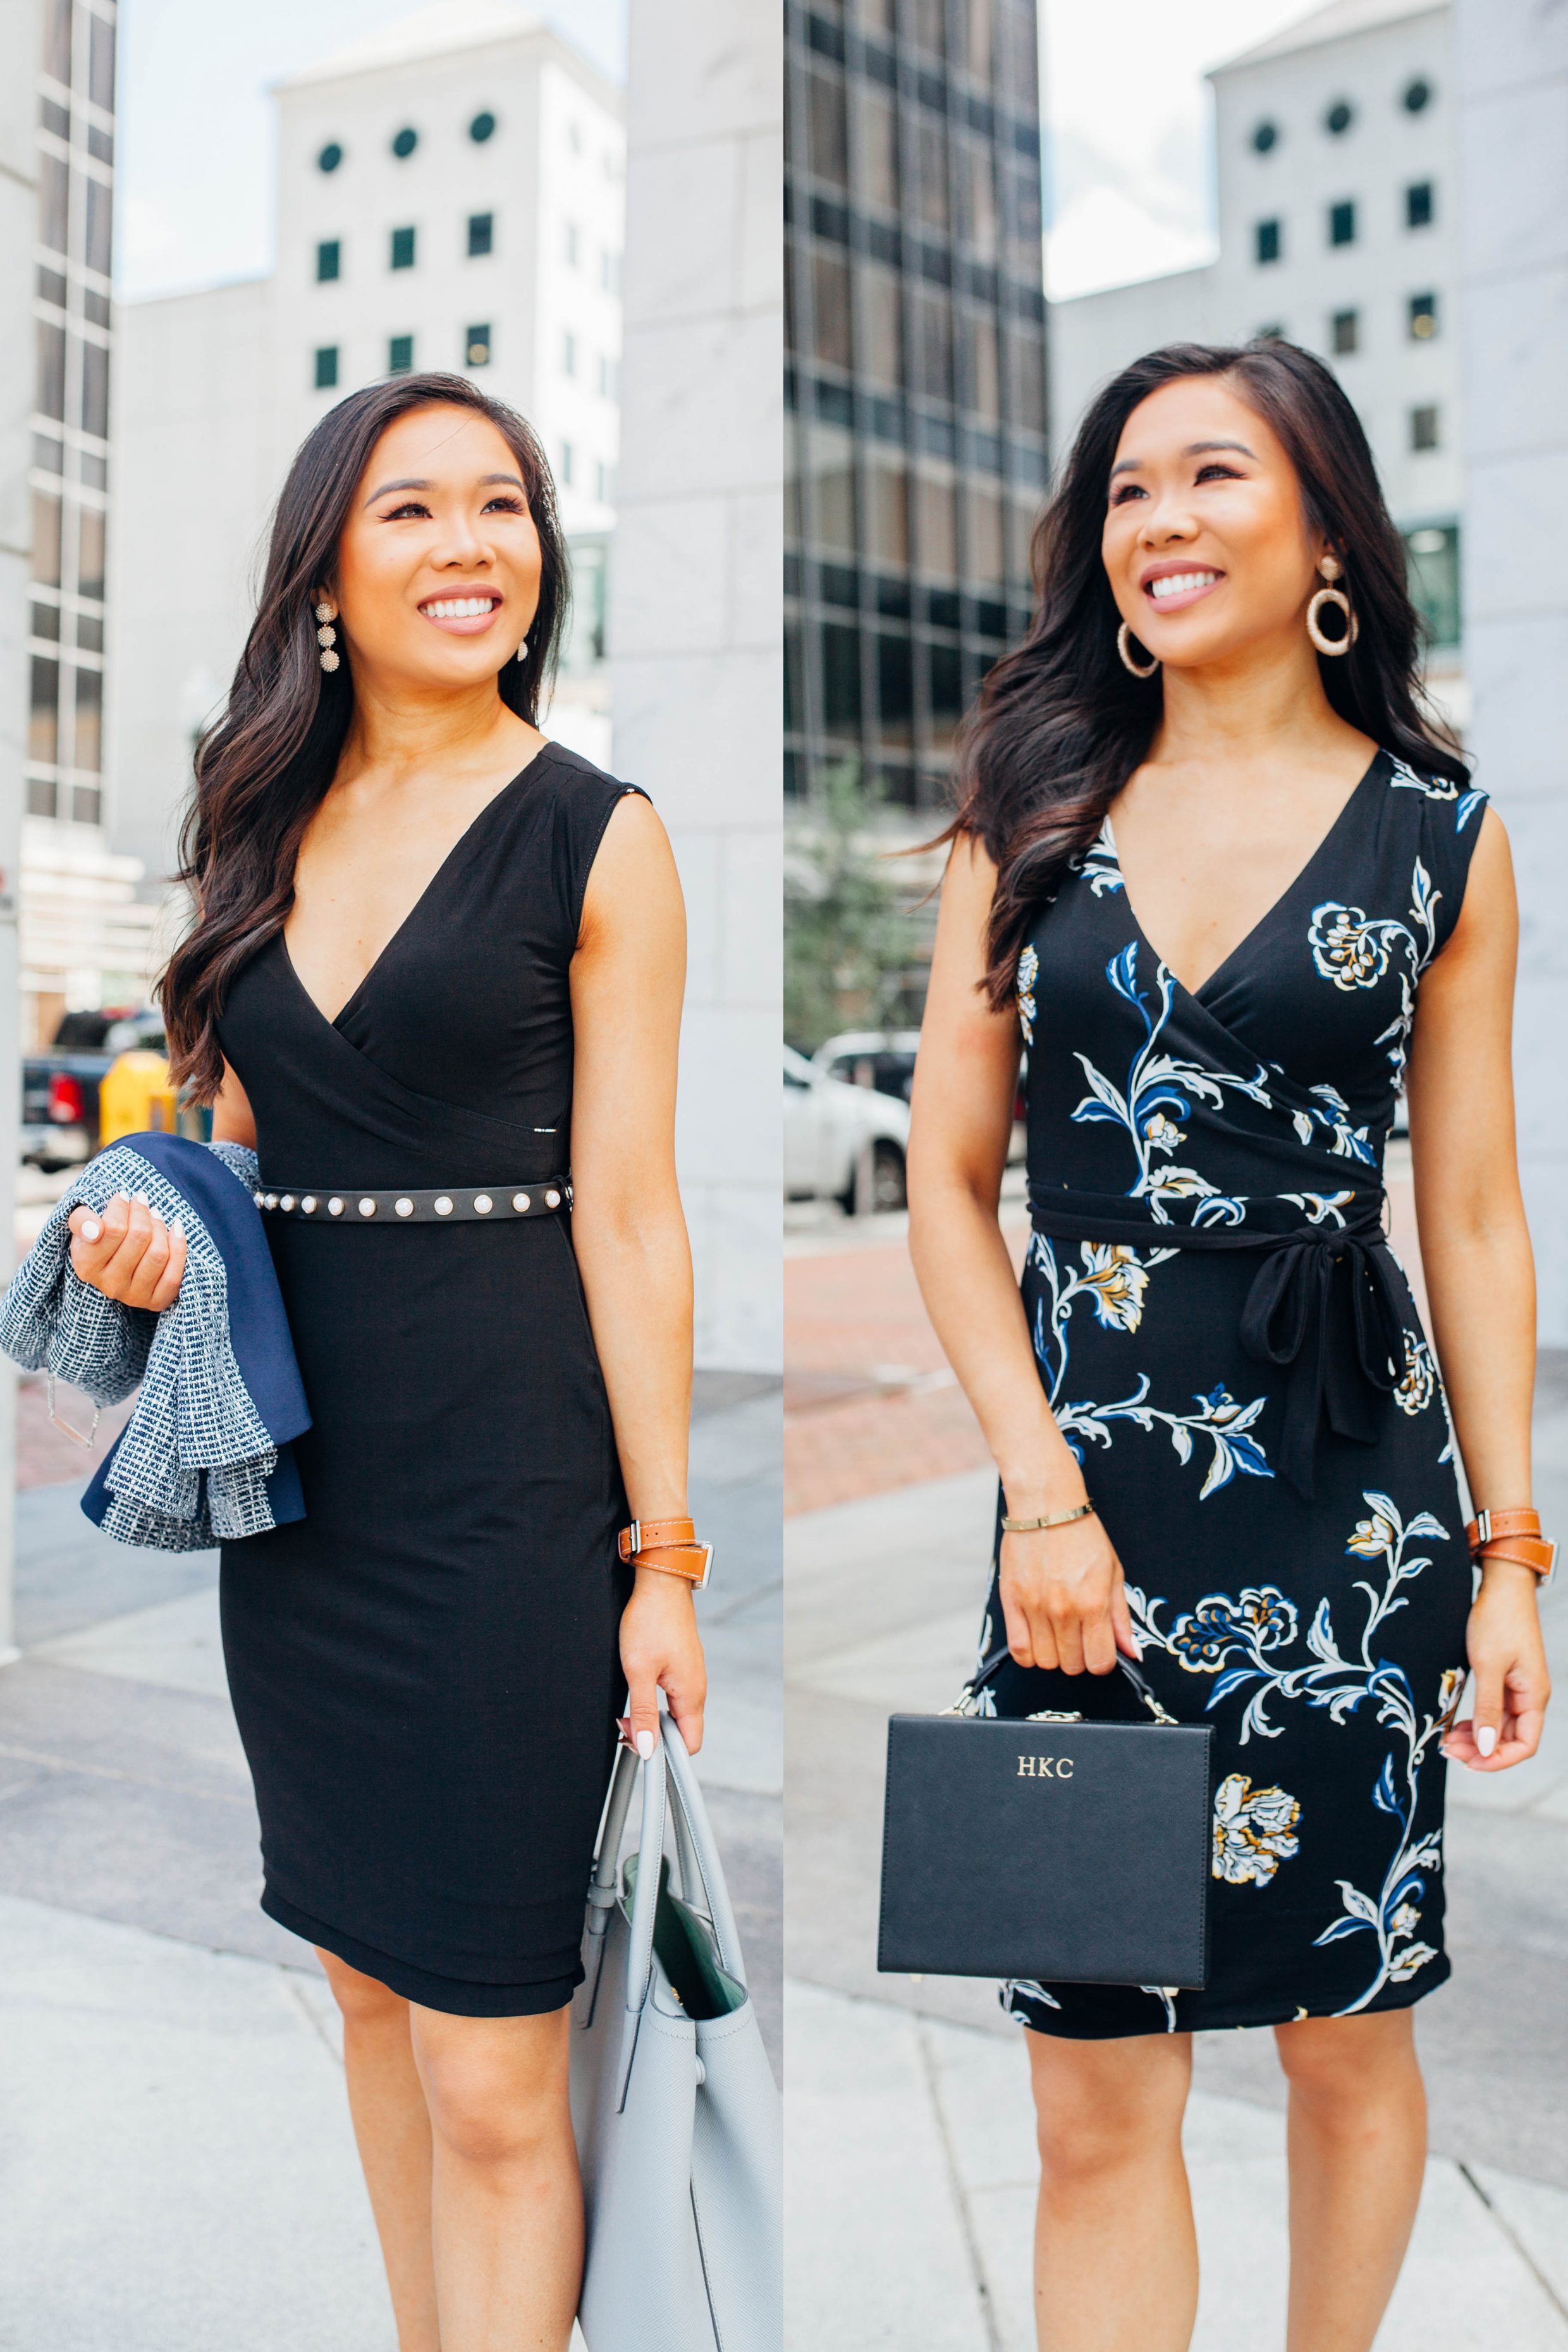 Hoang-Kim of Color & Chi wears a reversible dress